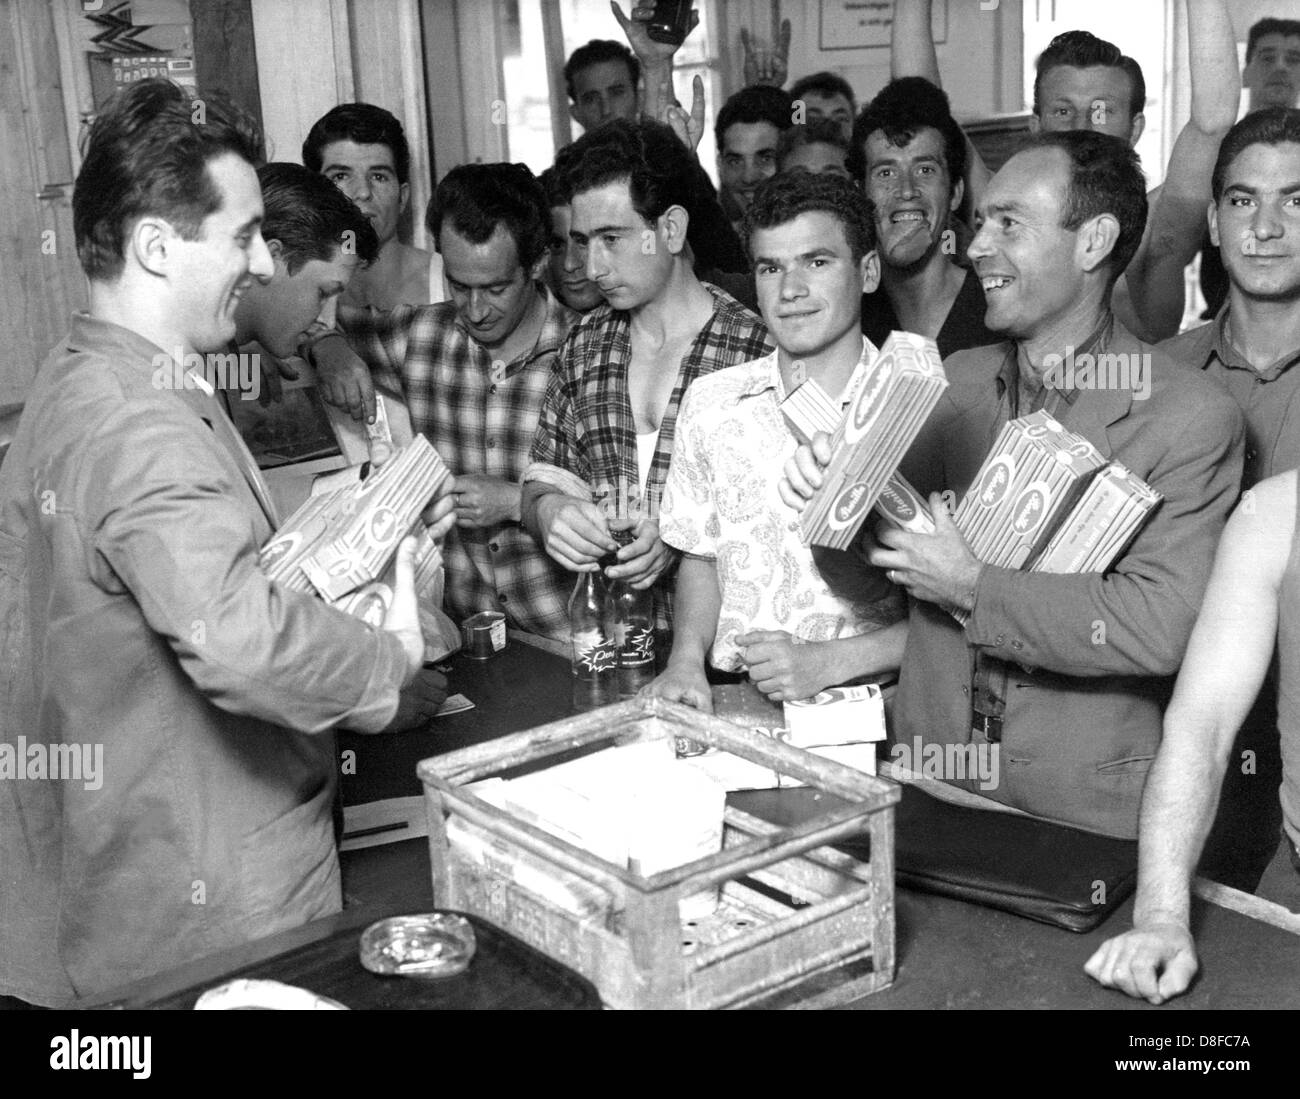 A group of Italian Gastarbeiter (especially guest workers in Germany in the 1960s and 1970s) buy spaghetti in Wolfsburg in 1962. Stock Photo